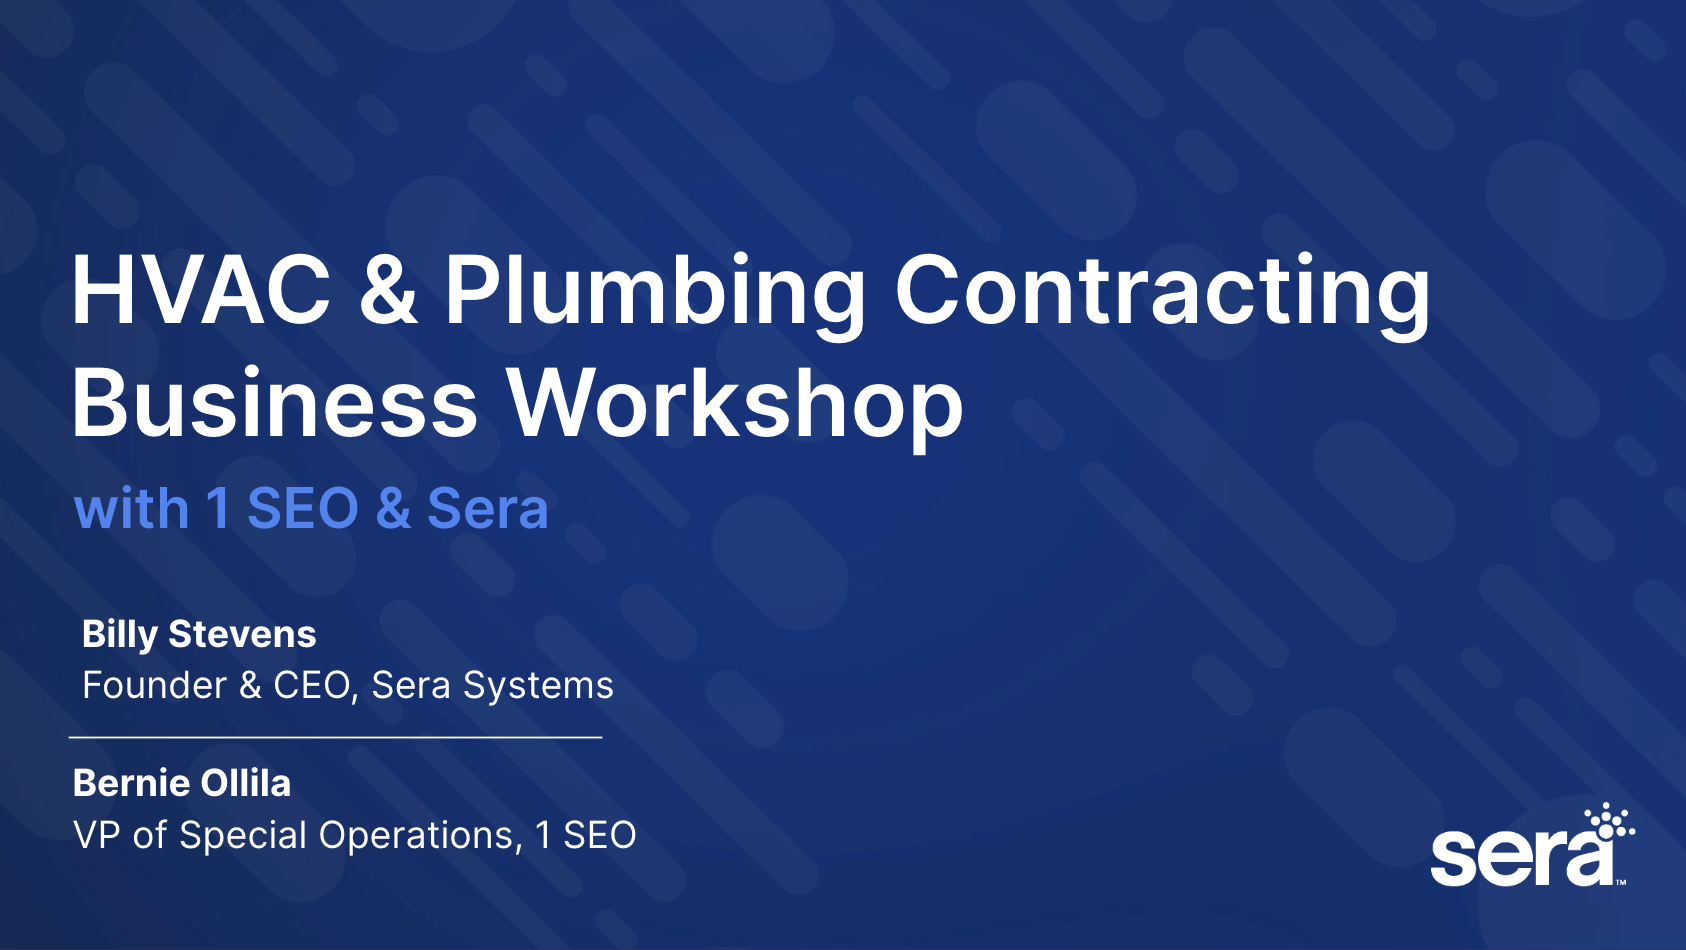 HVAC & Plumbing Contracting Business Workshop with 1SEO & Sera